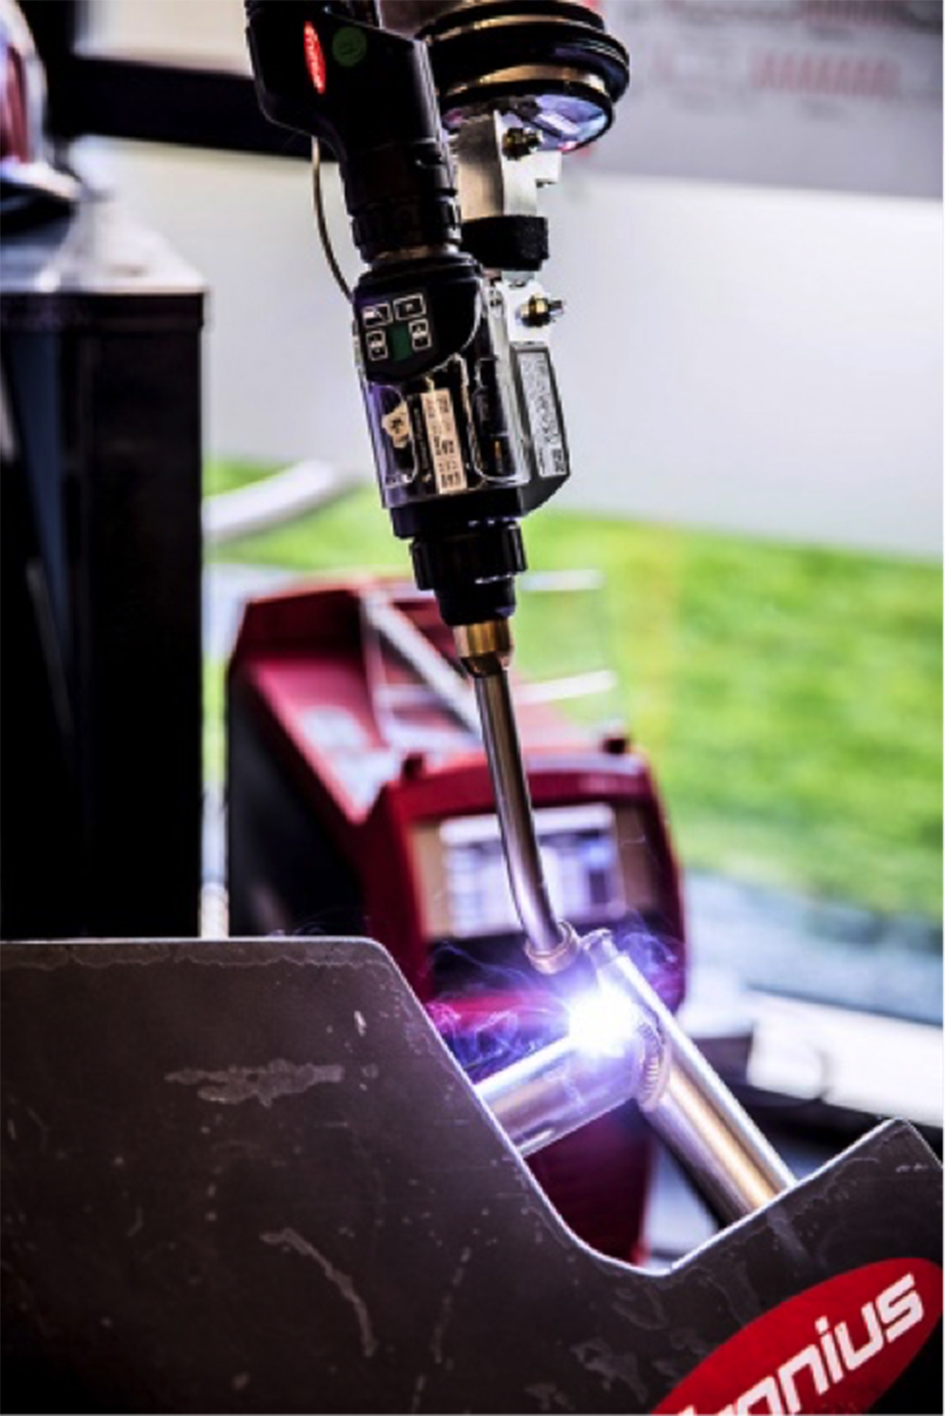 PMC mix drive harnesses the possibilities offered by a powerful PullMig welding torch, such as the Robacta Drive, to control the heat input even more precisely when welding aluminium, CrNi or vertical-up seams in steel